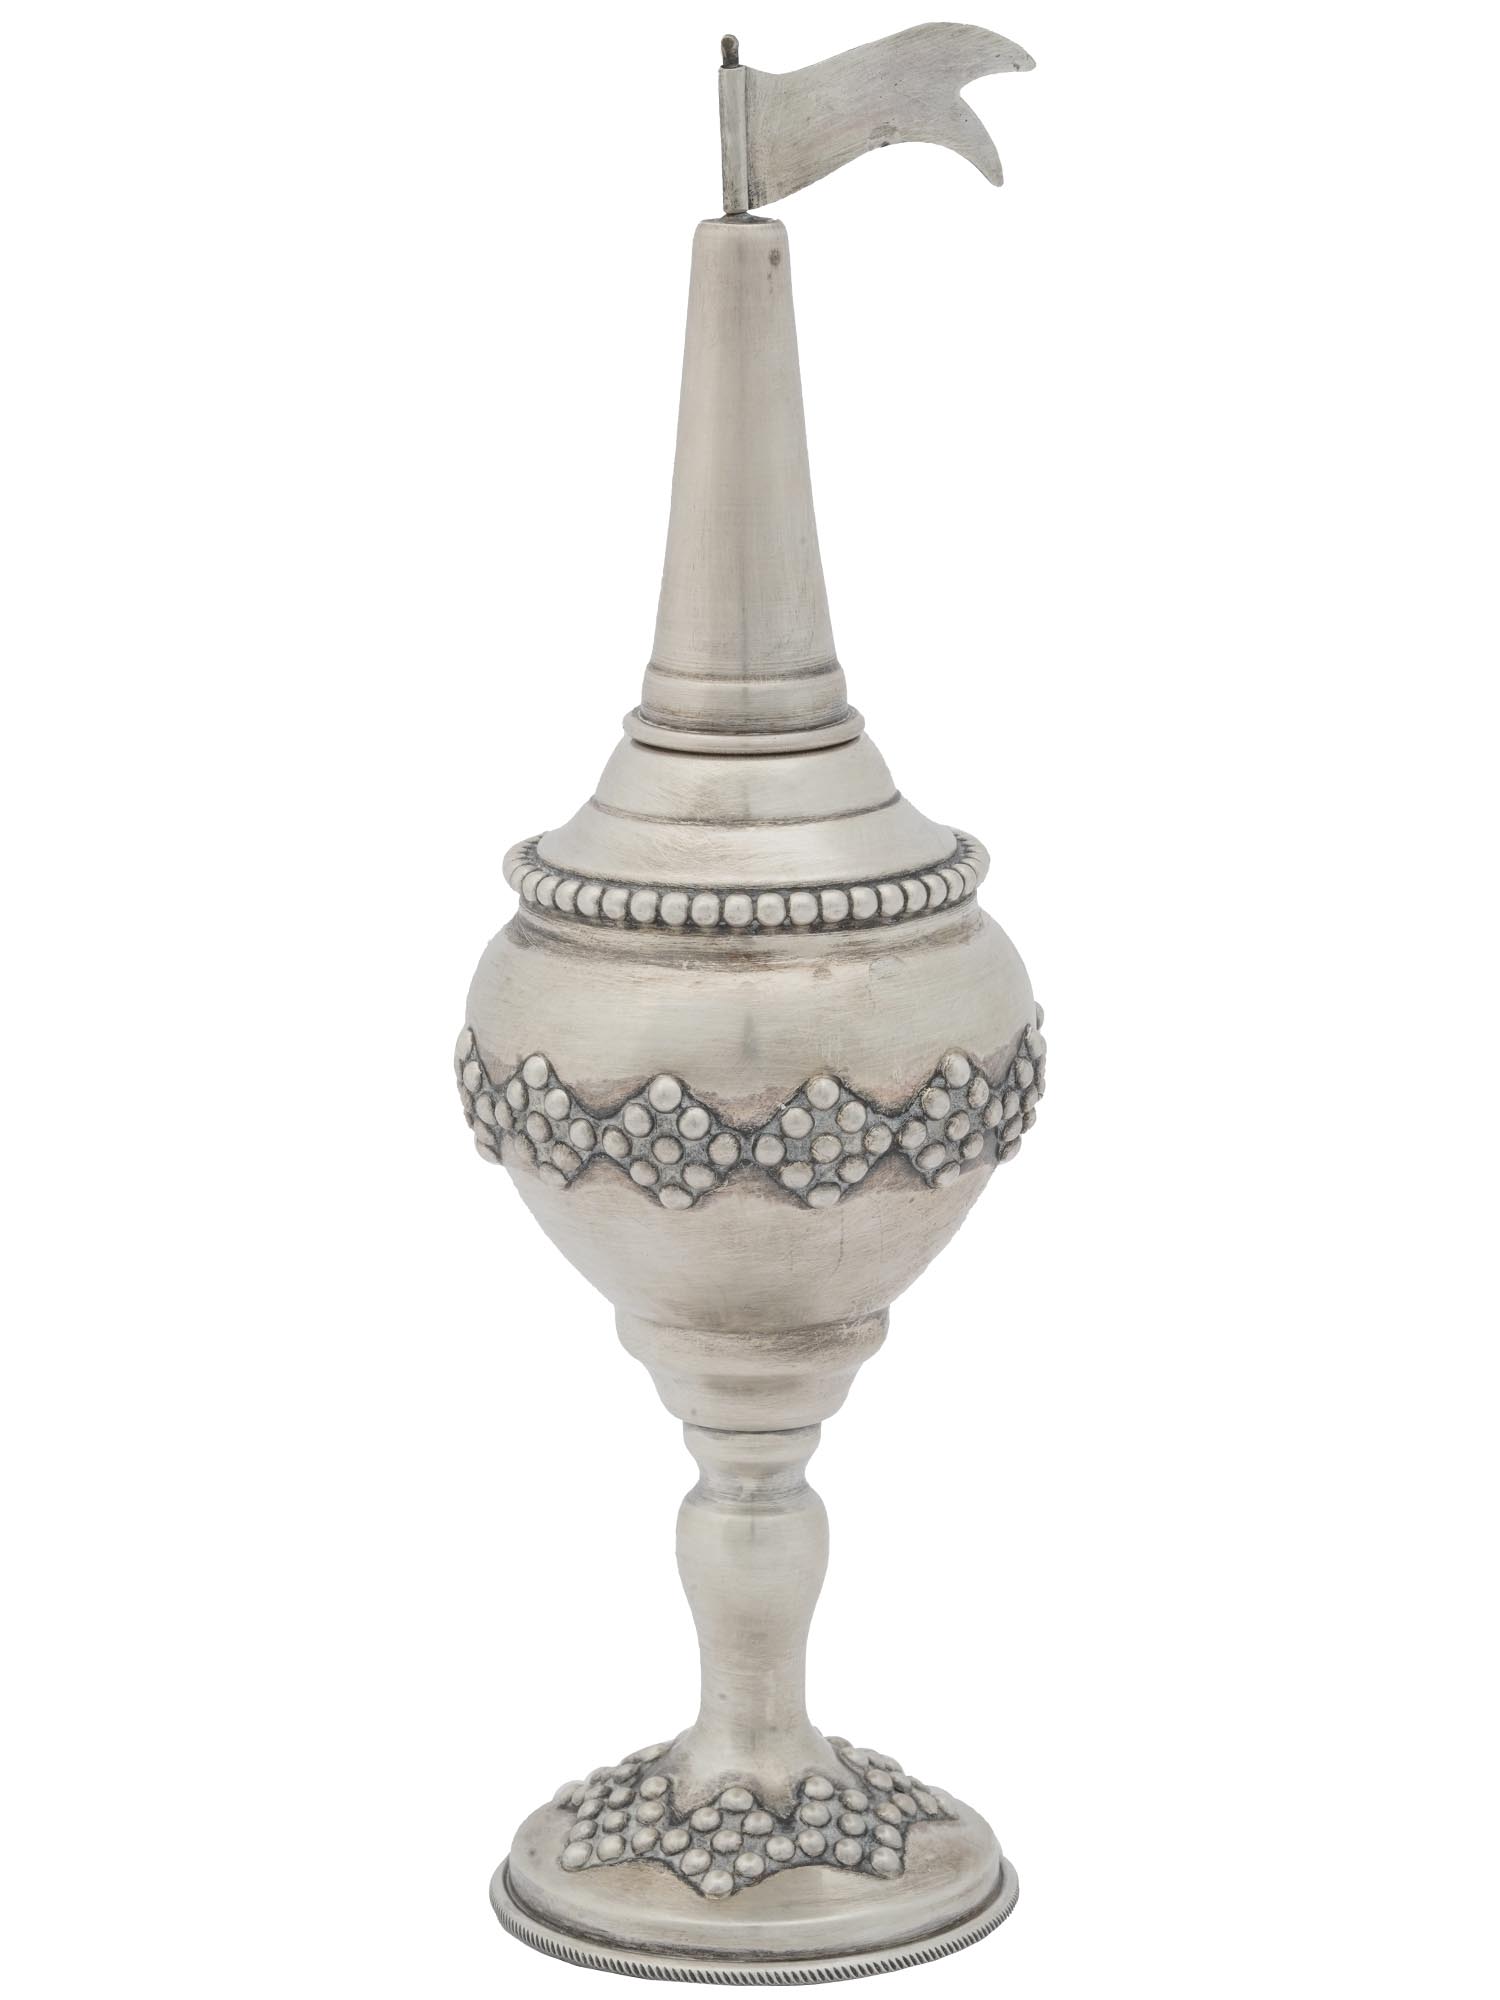 VINTAGE JUDAICA STERLING SILVER SPICE TOWER PIC-0